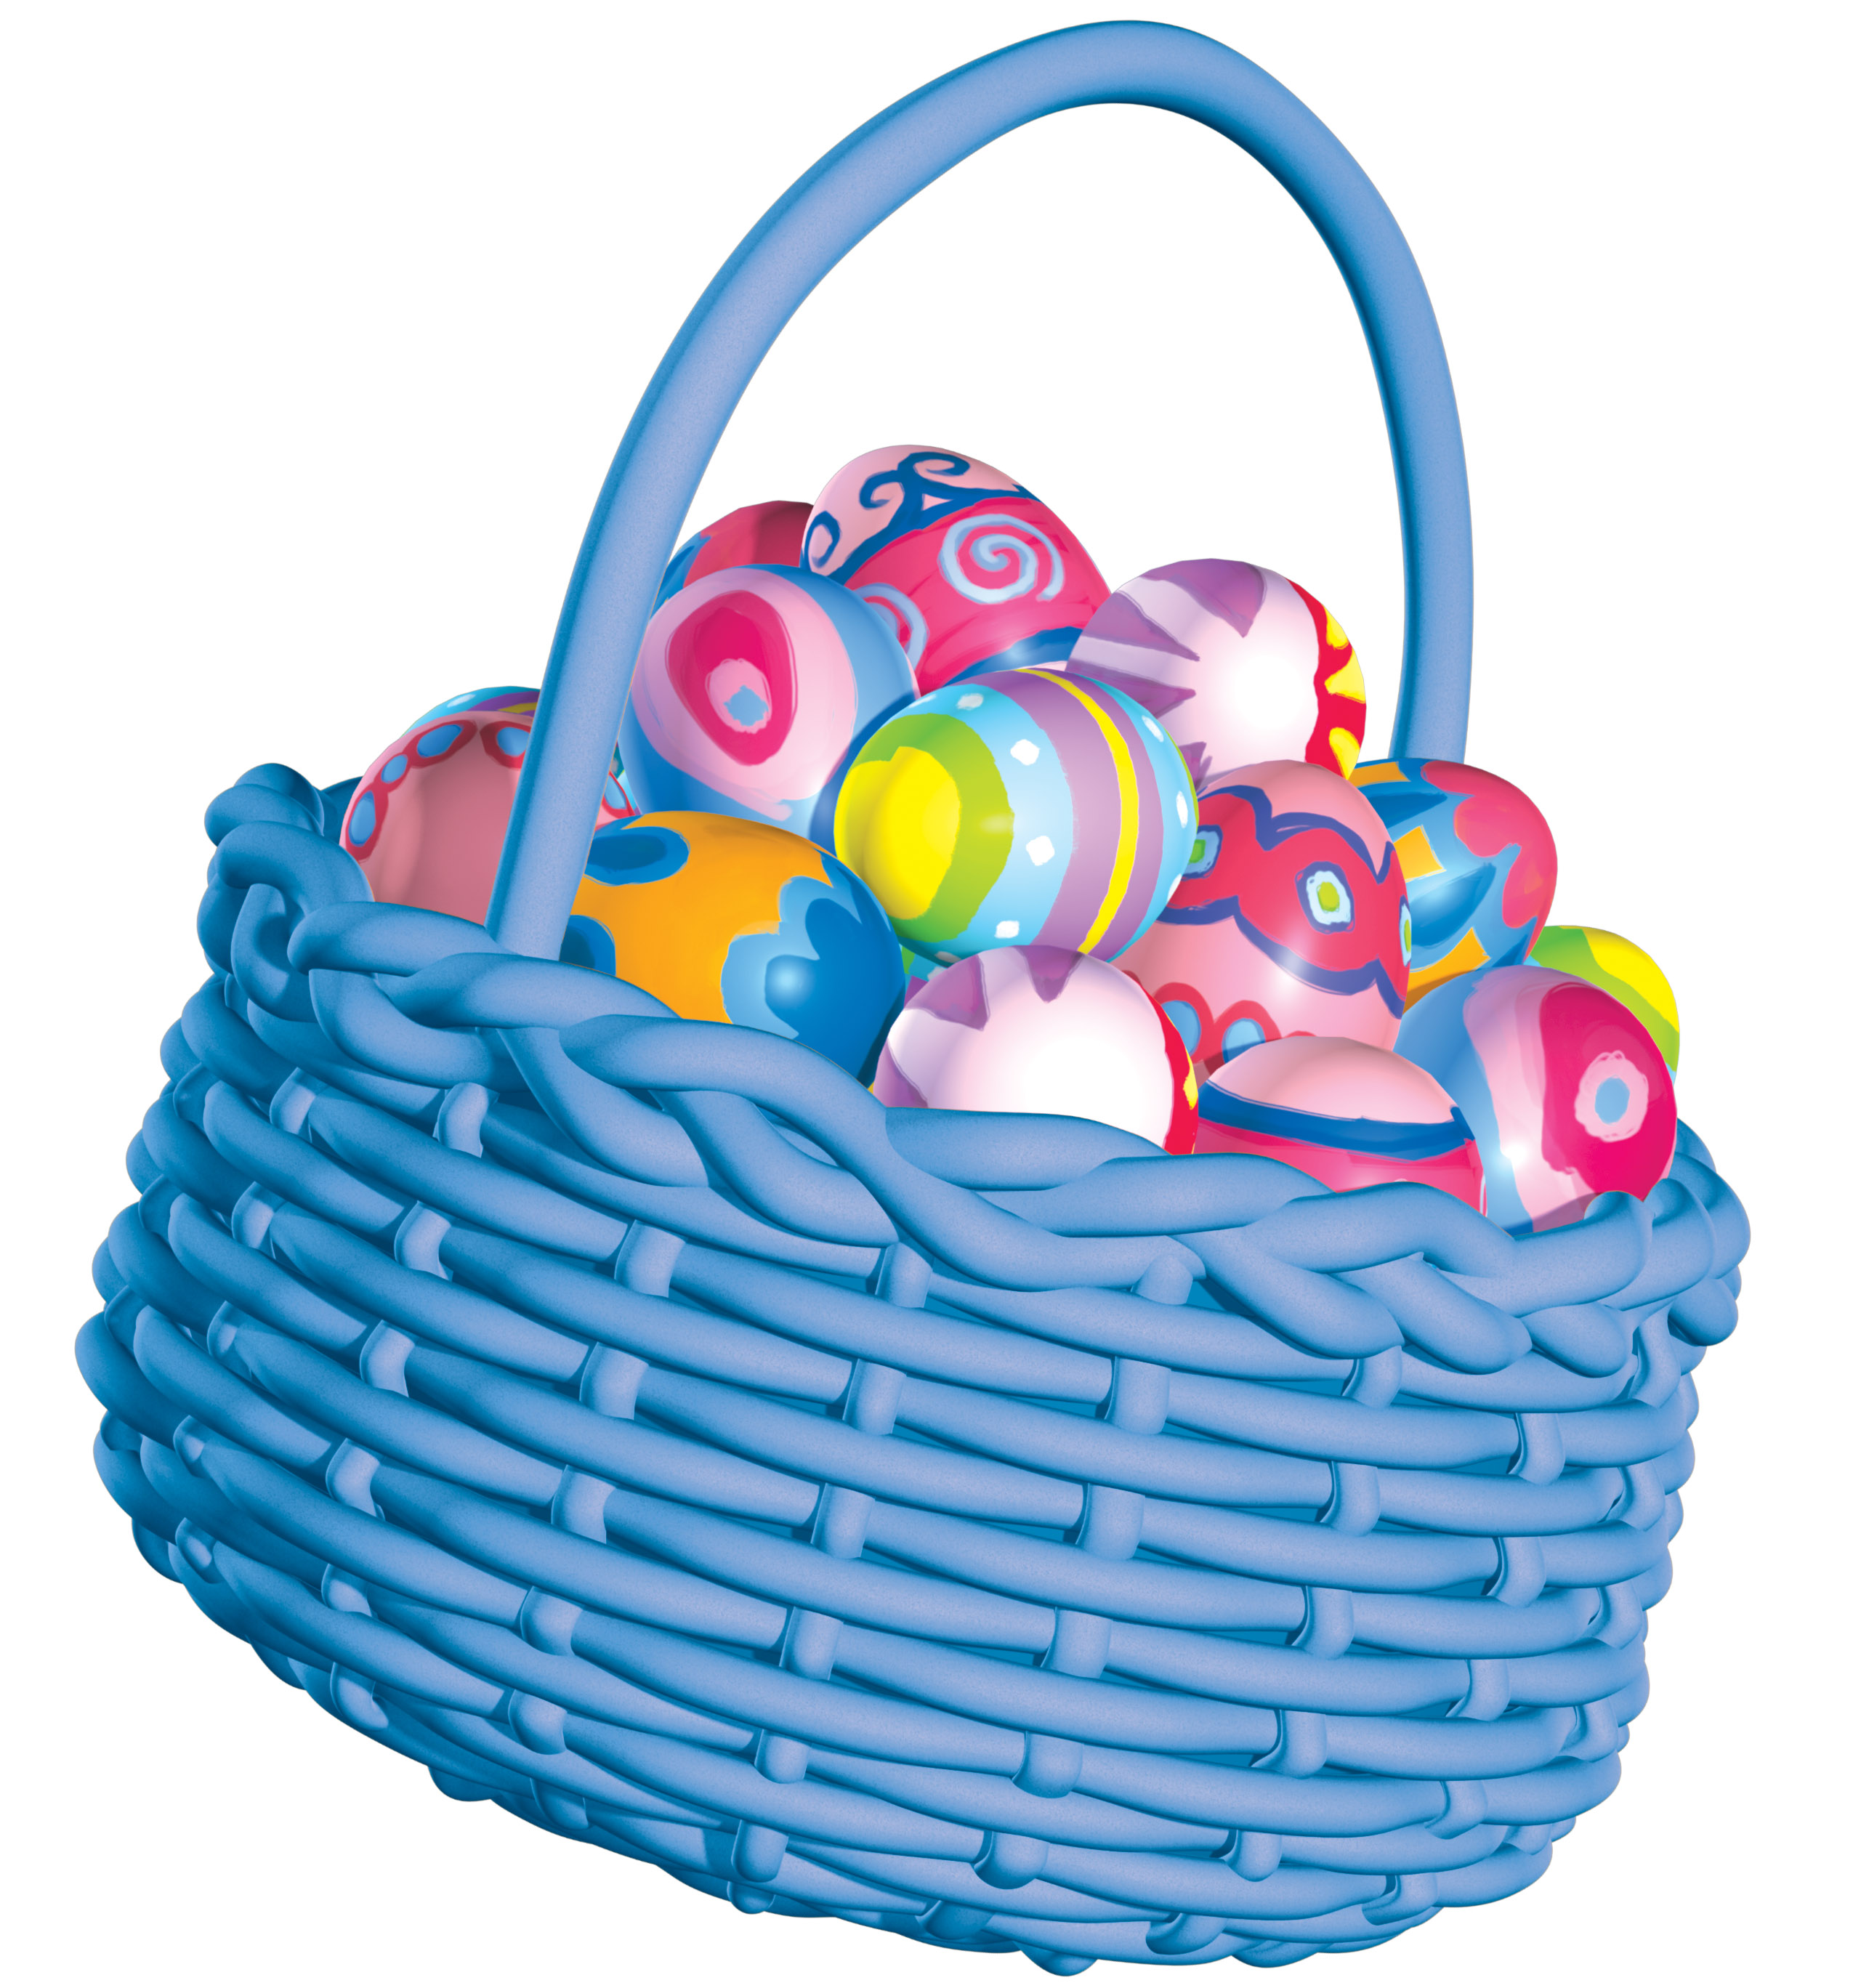 Picture Of Easter Basket | Free Download Clip Art | Free Clip Art ...